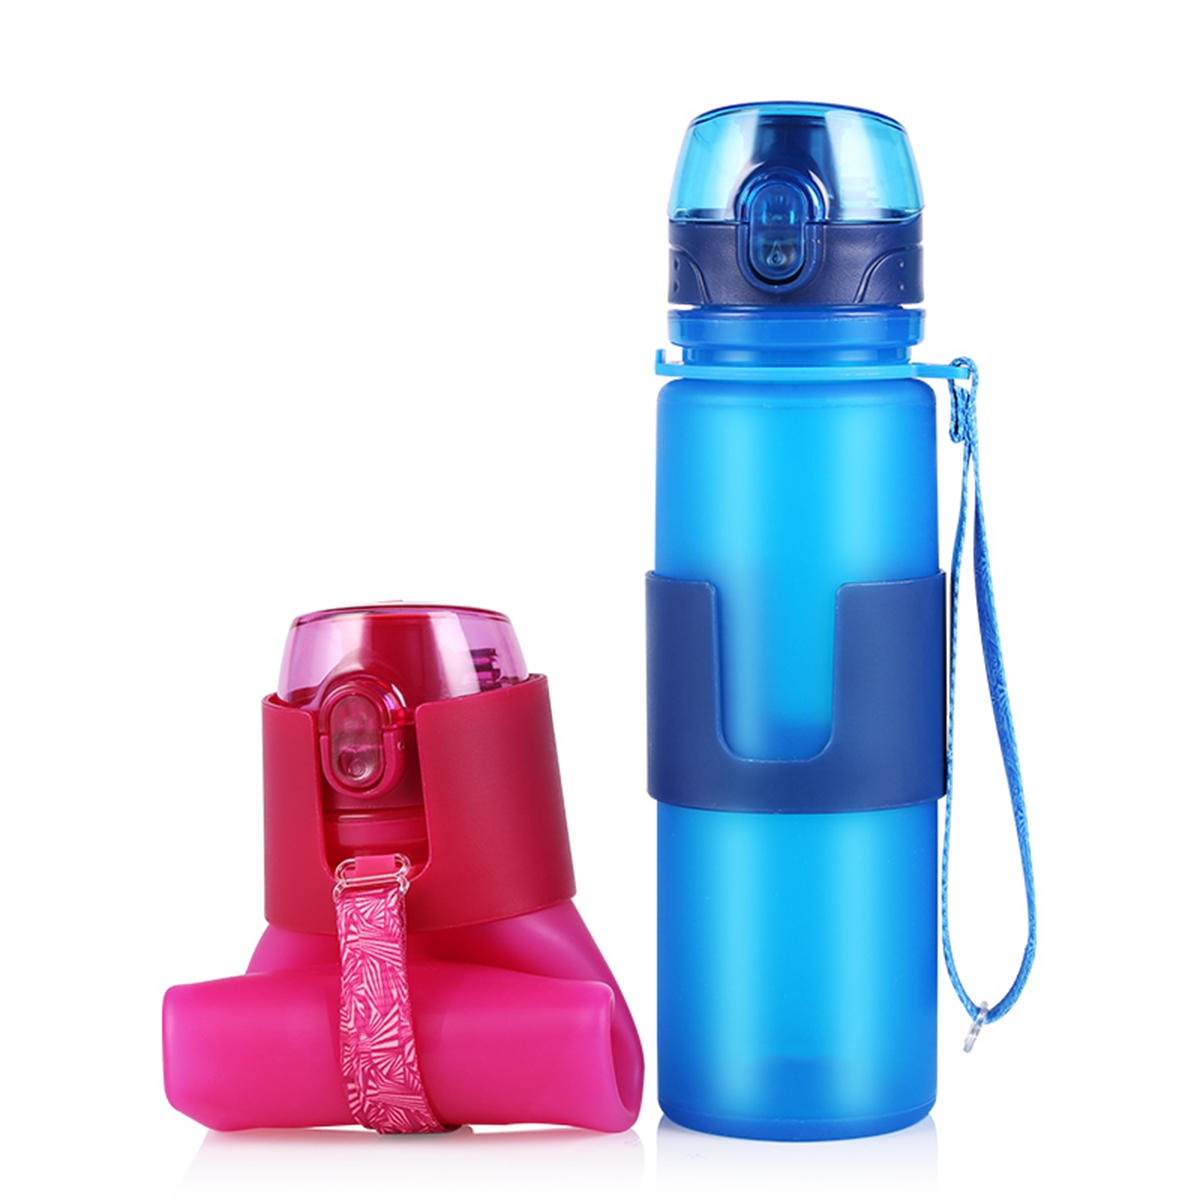 650ml Silicone Collapsible Sports Water Bottle Folding Drink Water Fitness Riding Running Kettle